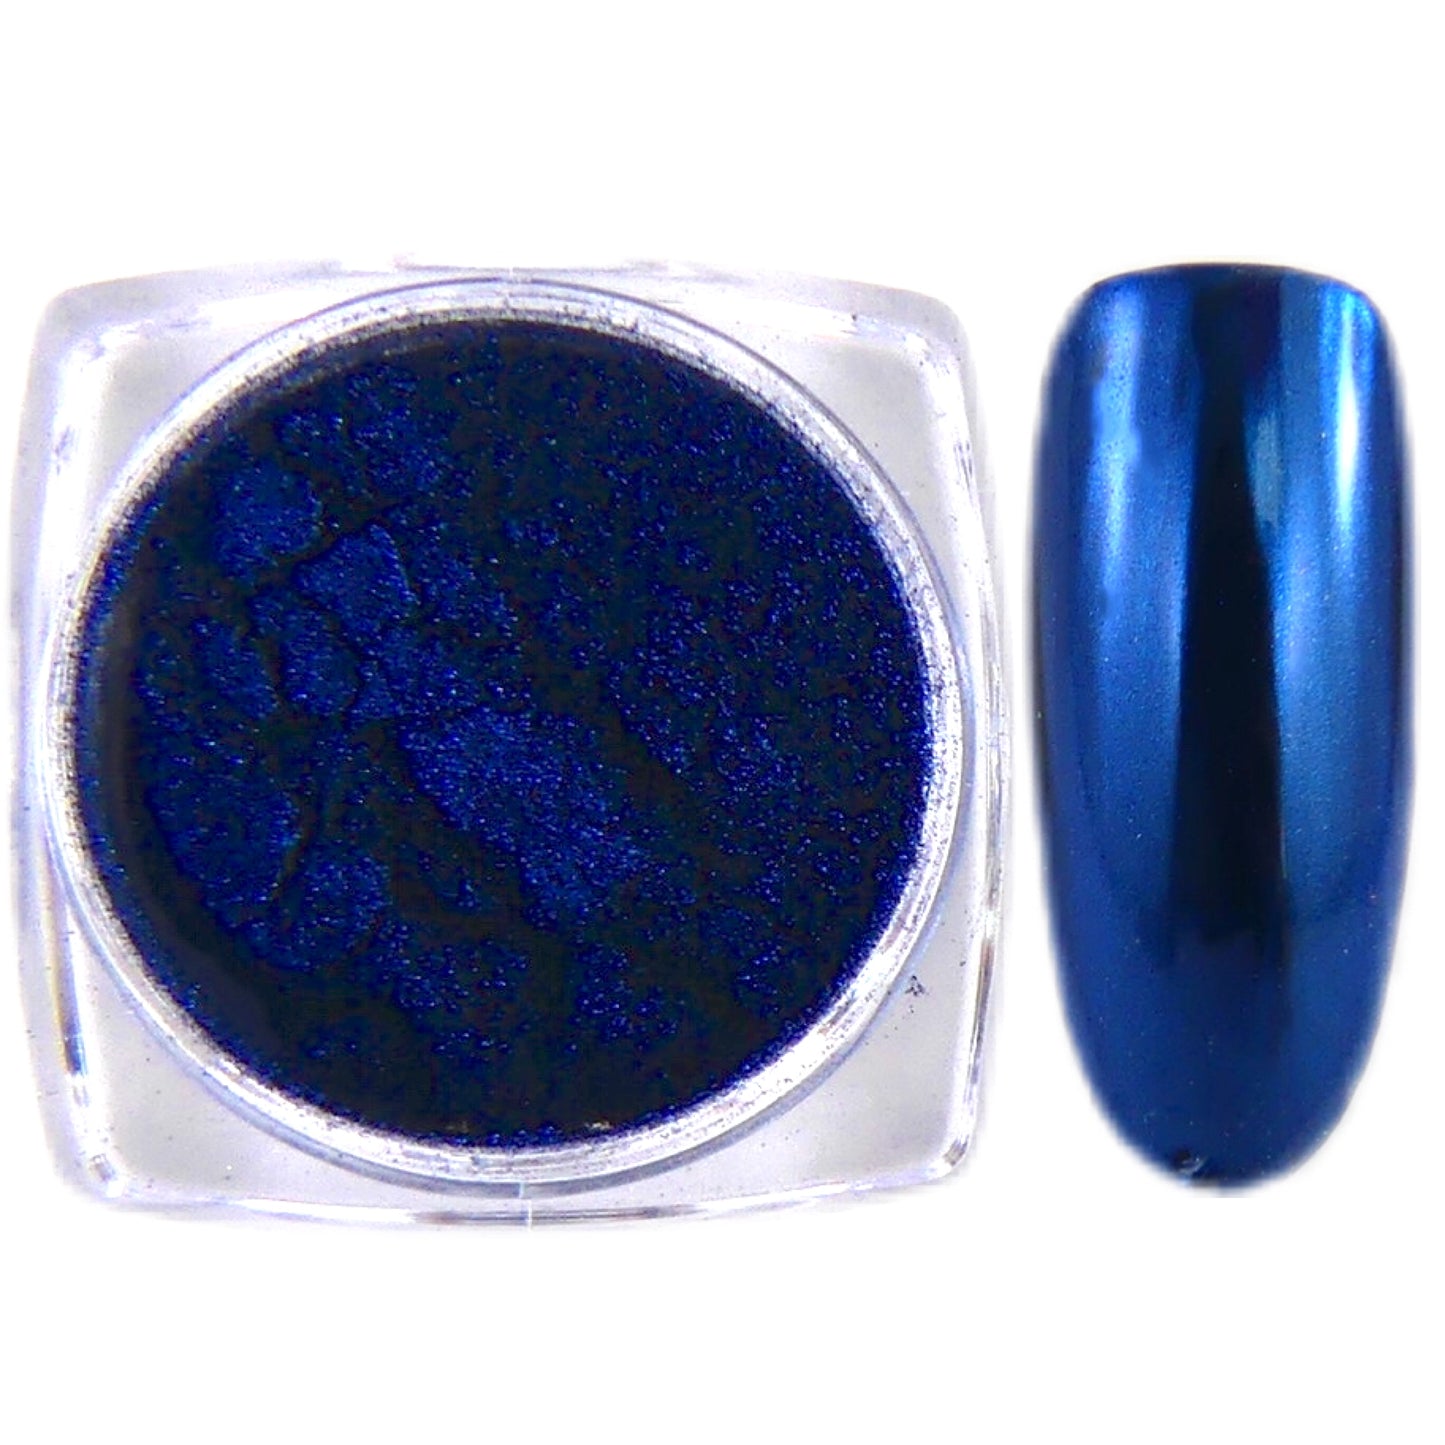 Load image into Gallery viewer, Blue Chrome Nail Art Powder 0.5g - My Little Nail Art Shop
